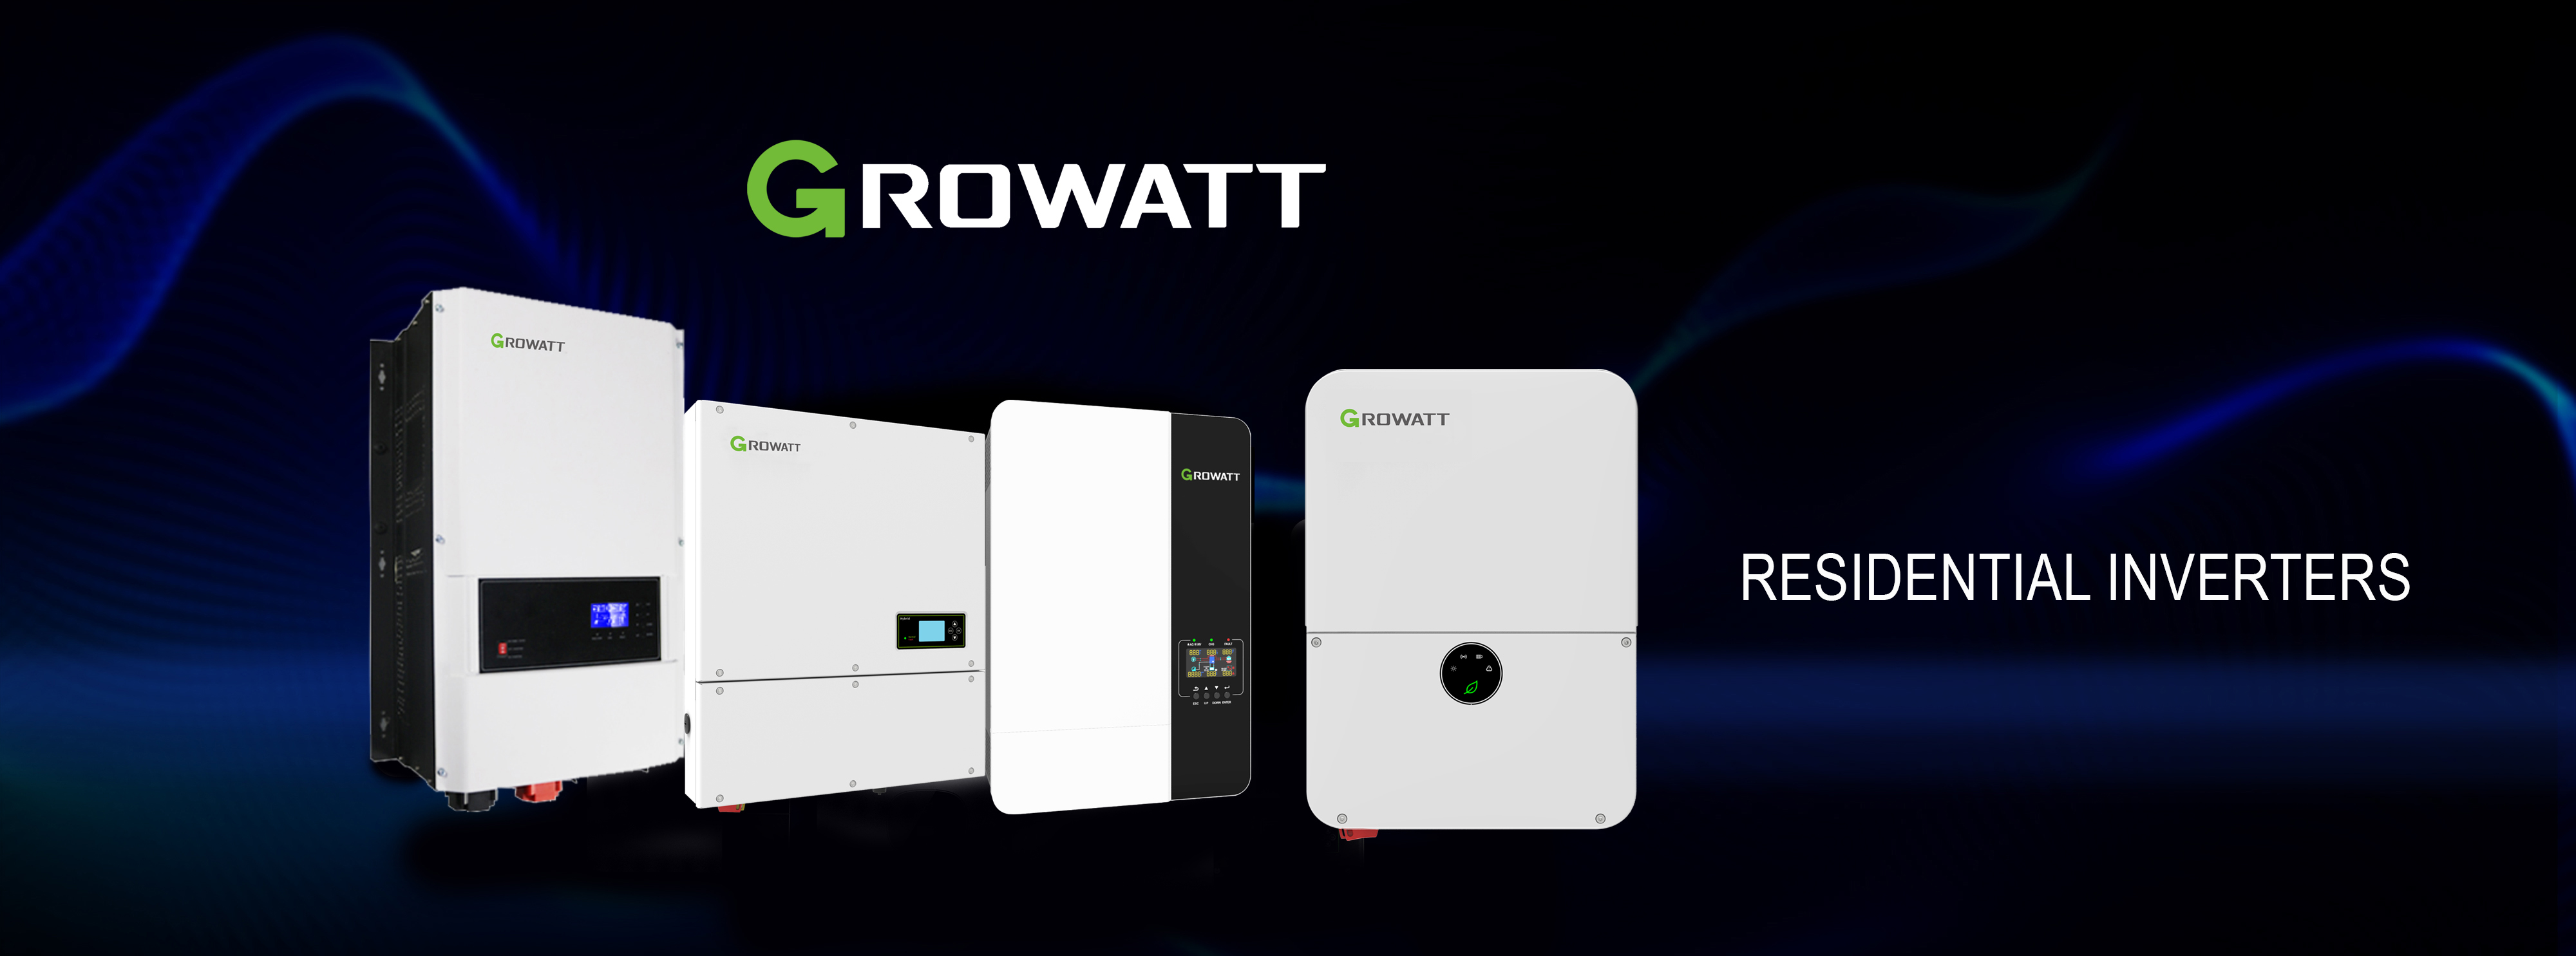 Growatt residential inverters for cabins, cottages and homes